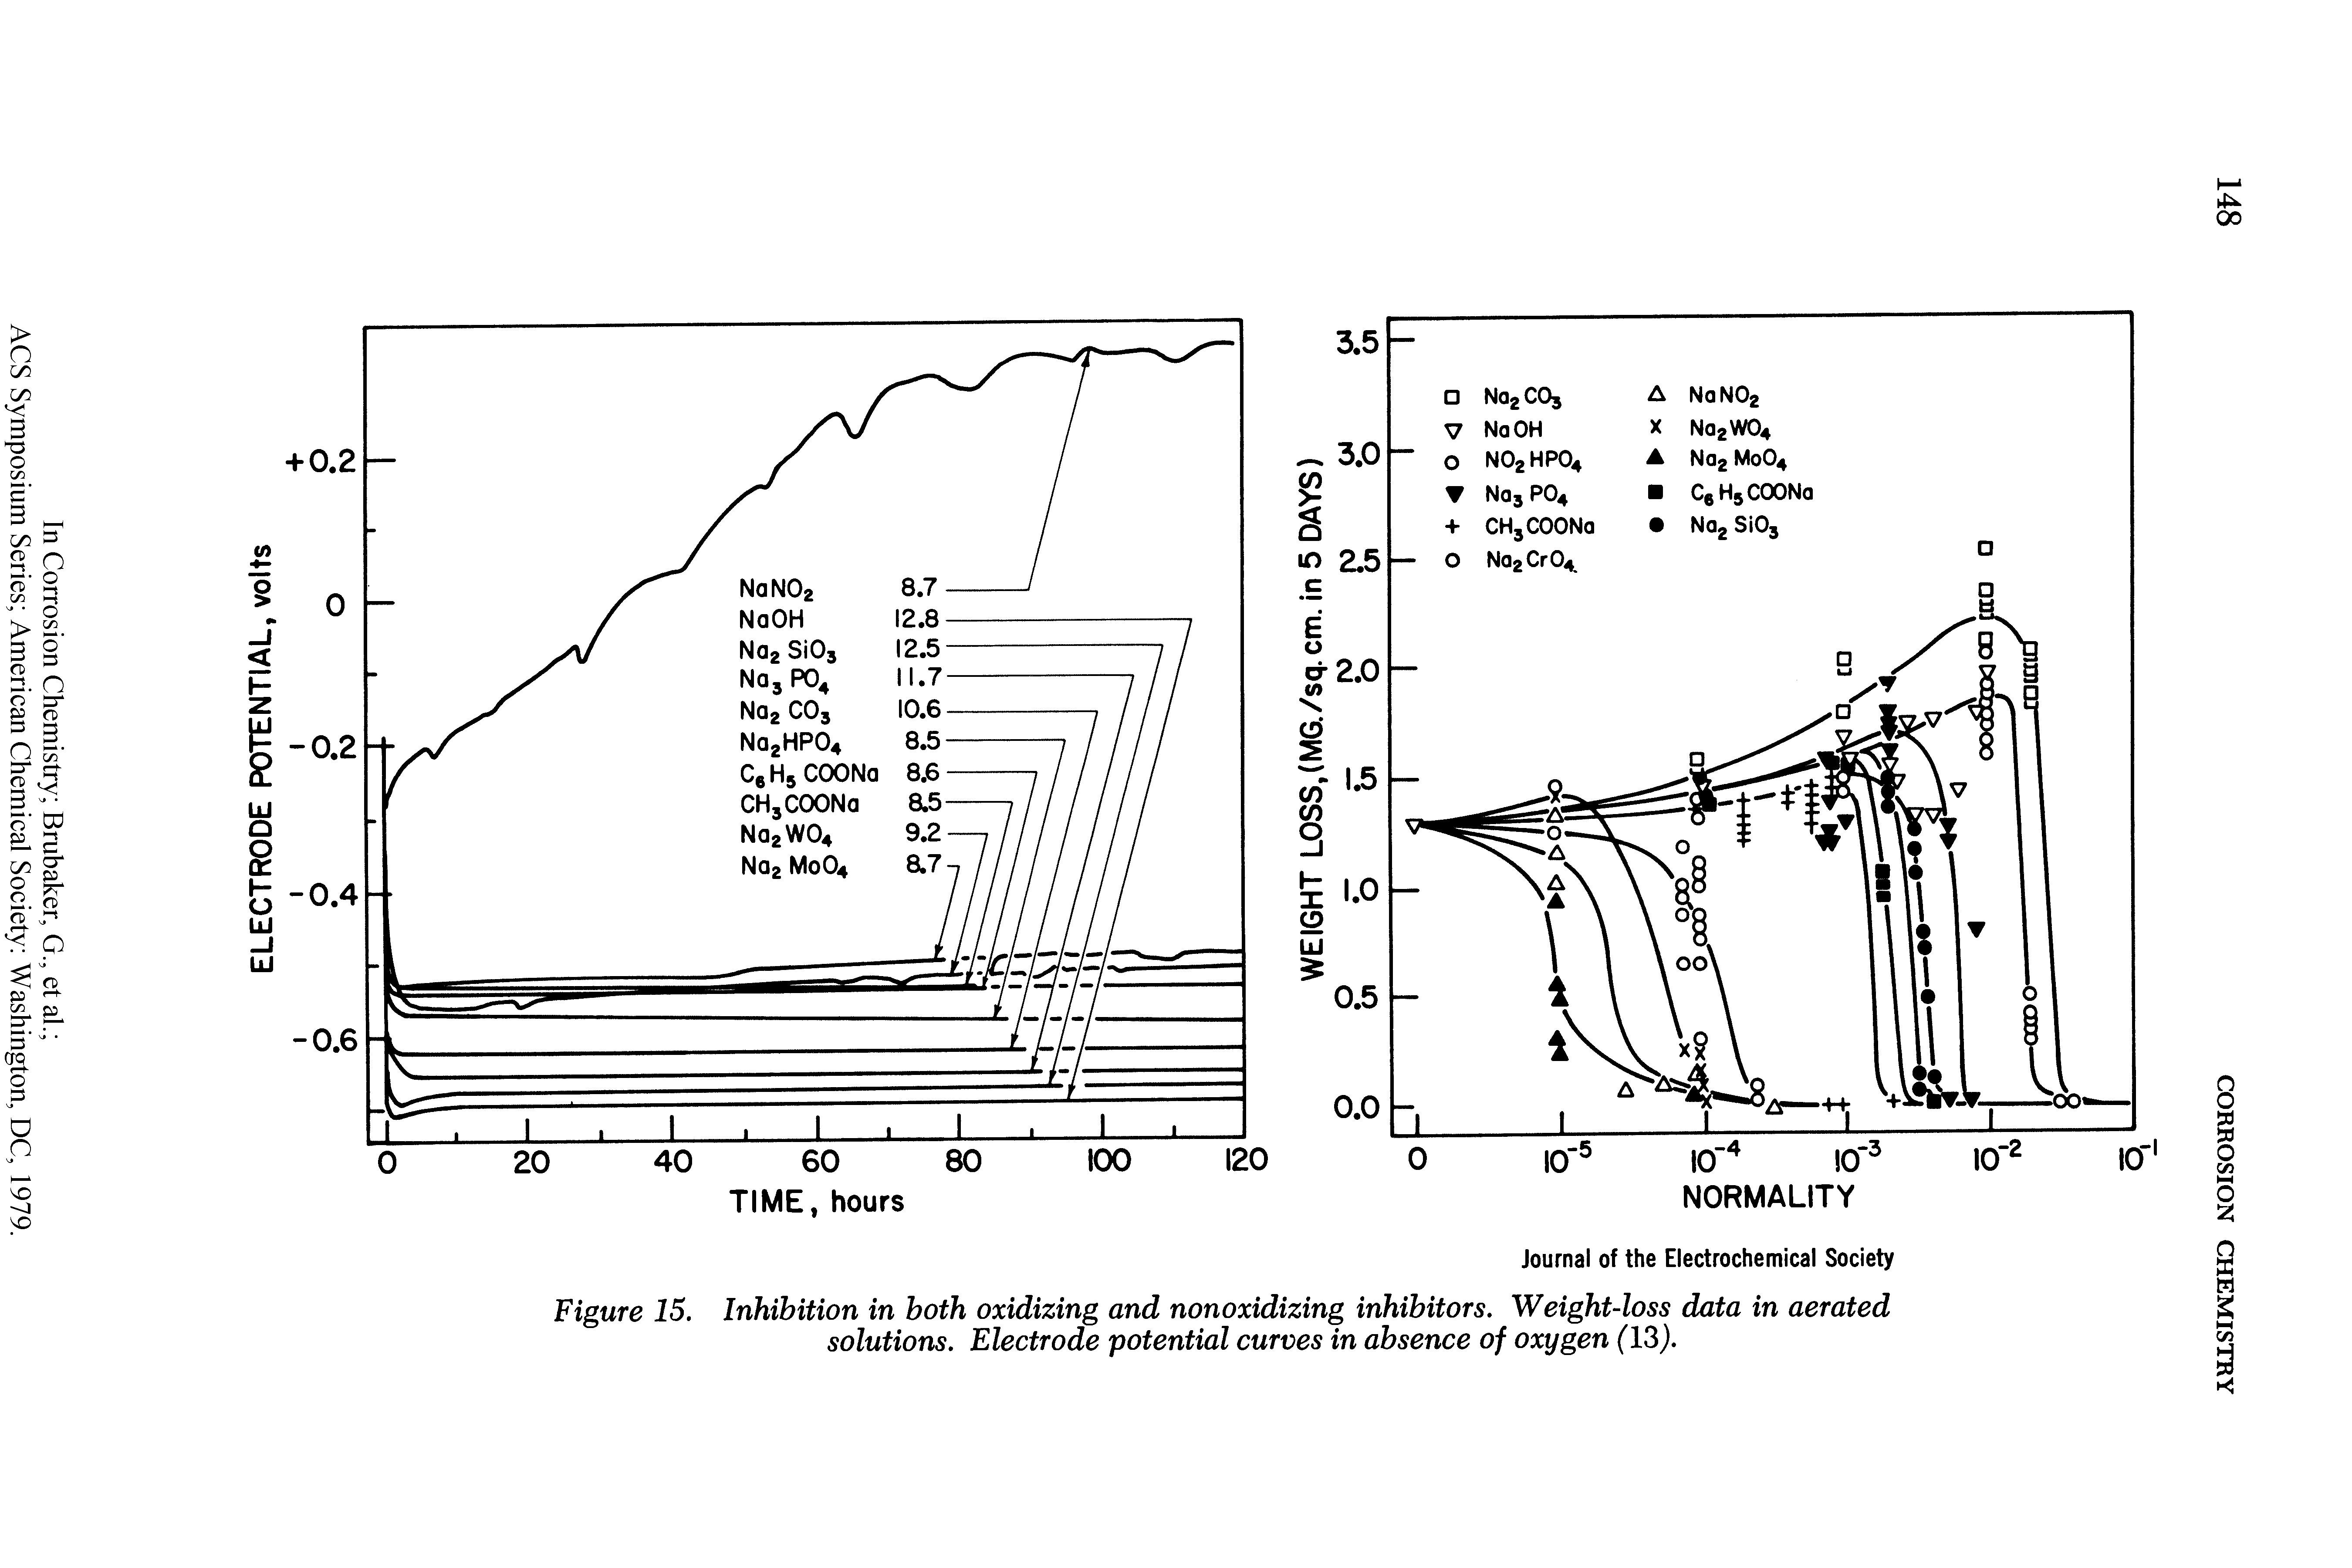 Figure 15. Inhibition in both oxidizing and nonoxidizing inhibitors. Weight-loss data in aerated solutions. Electrode potential curves in absence of oxygen (13).